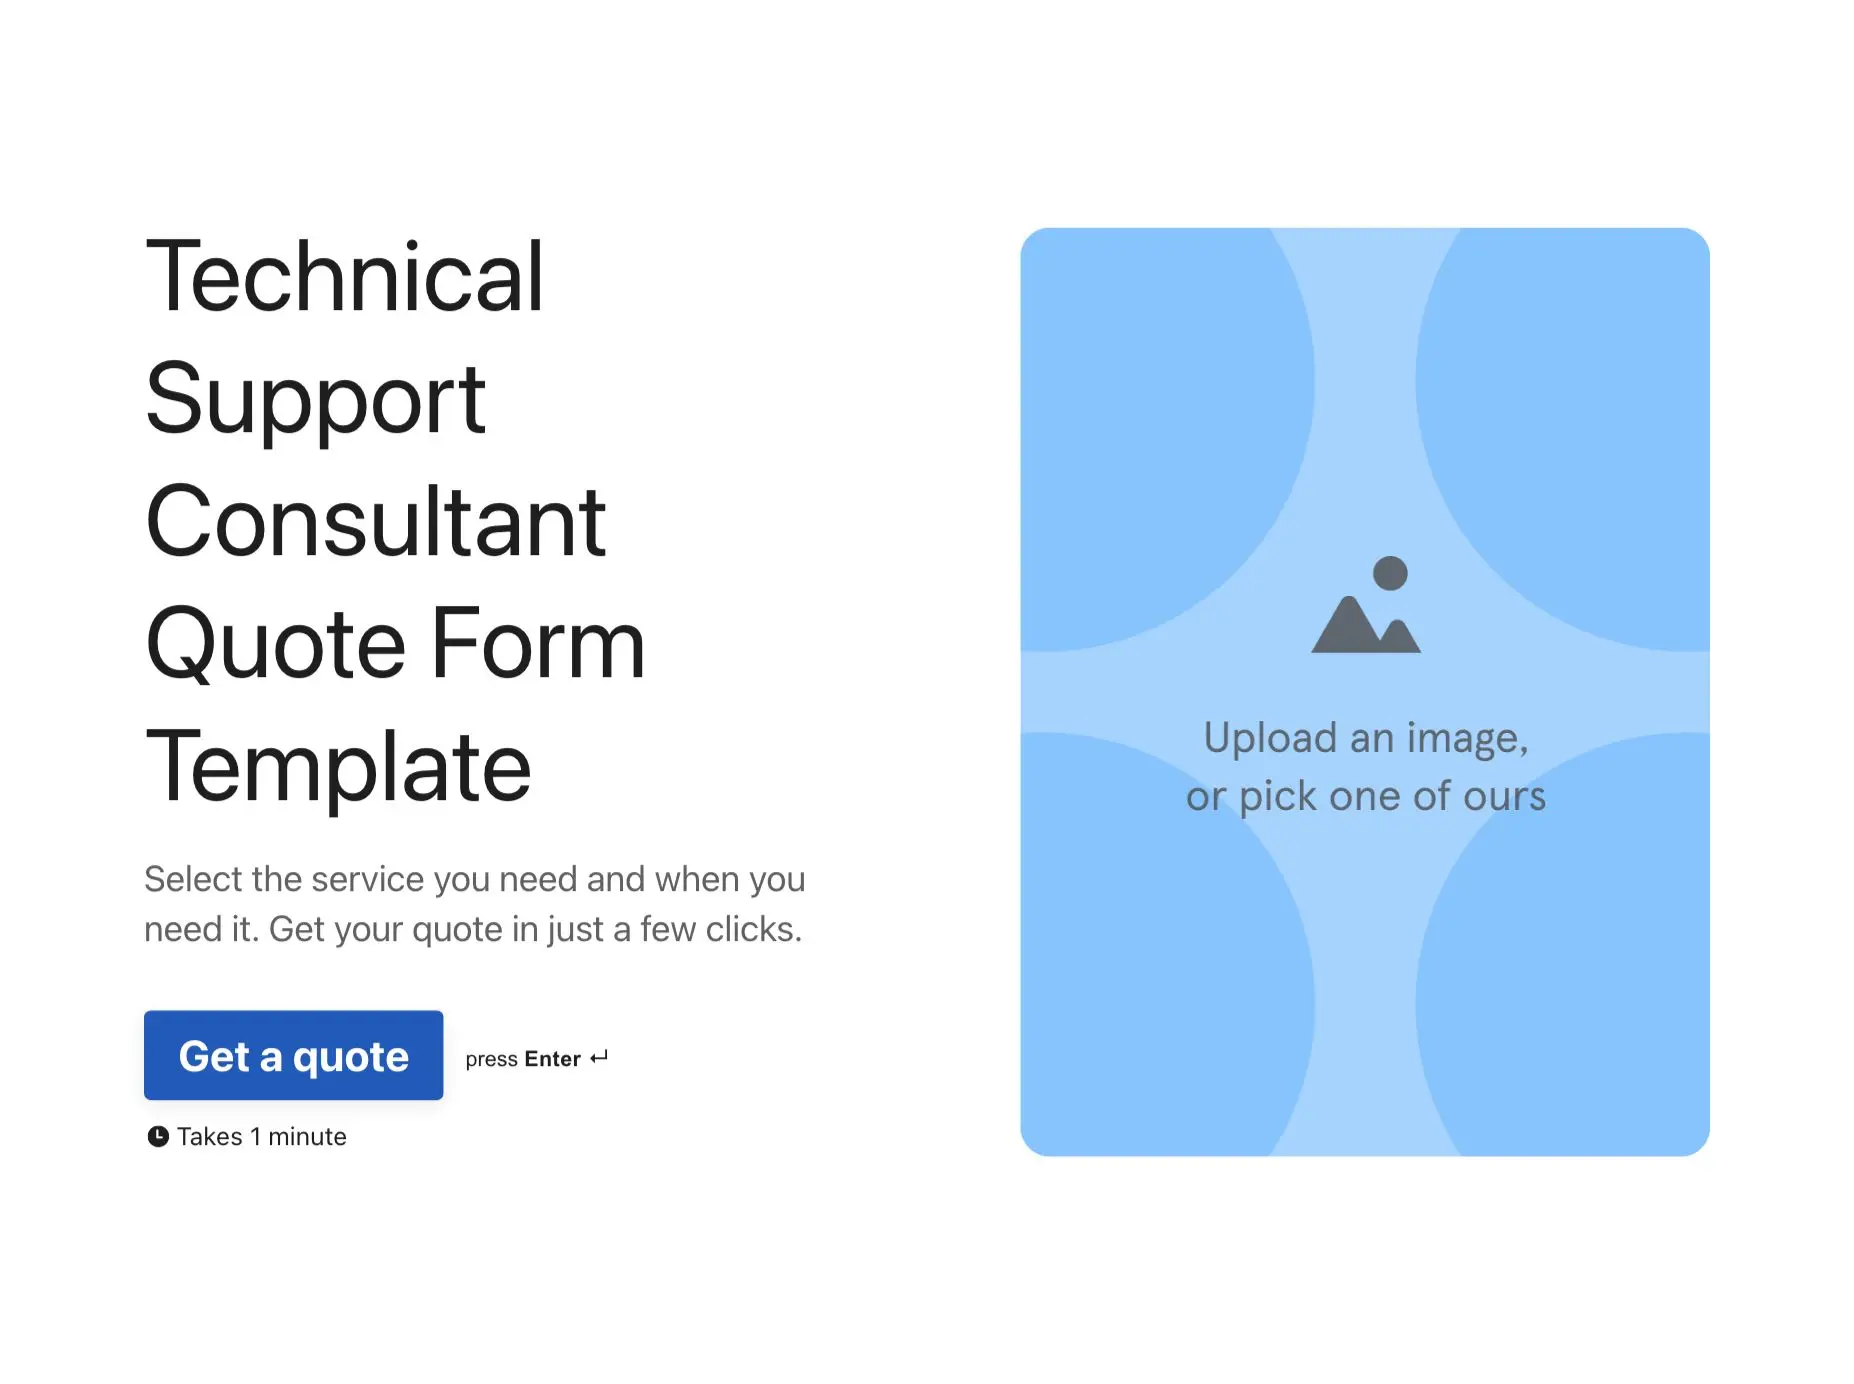 Technical Support Consultant Quote Form Template Hero